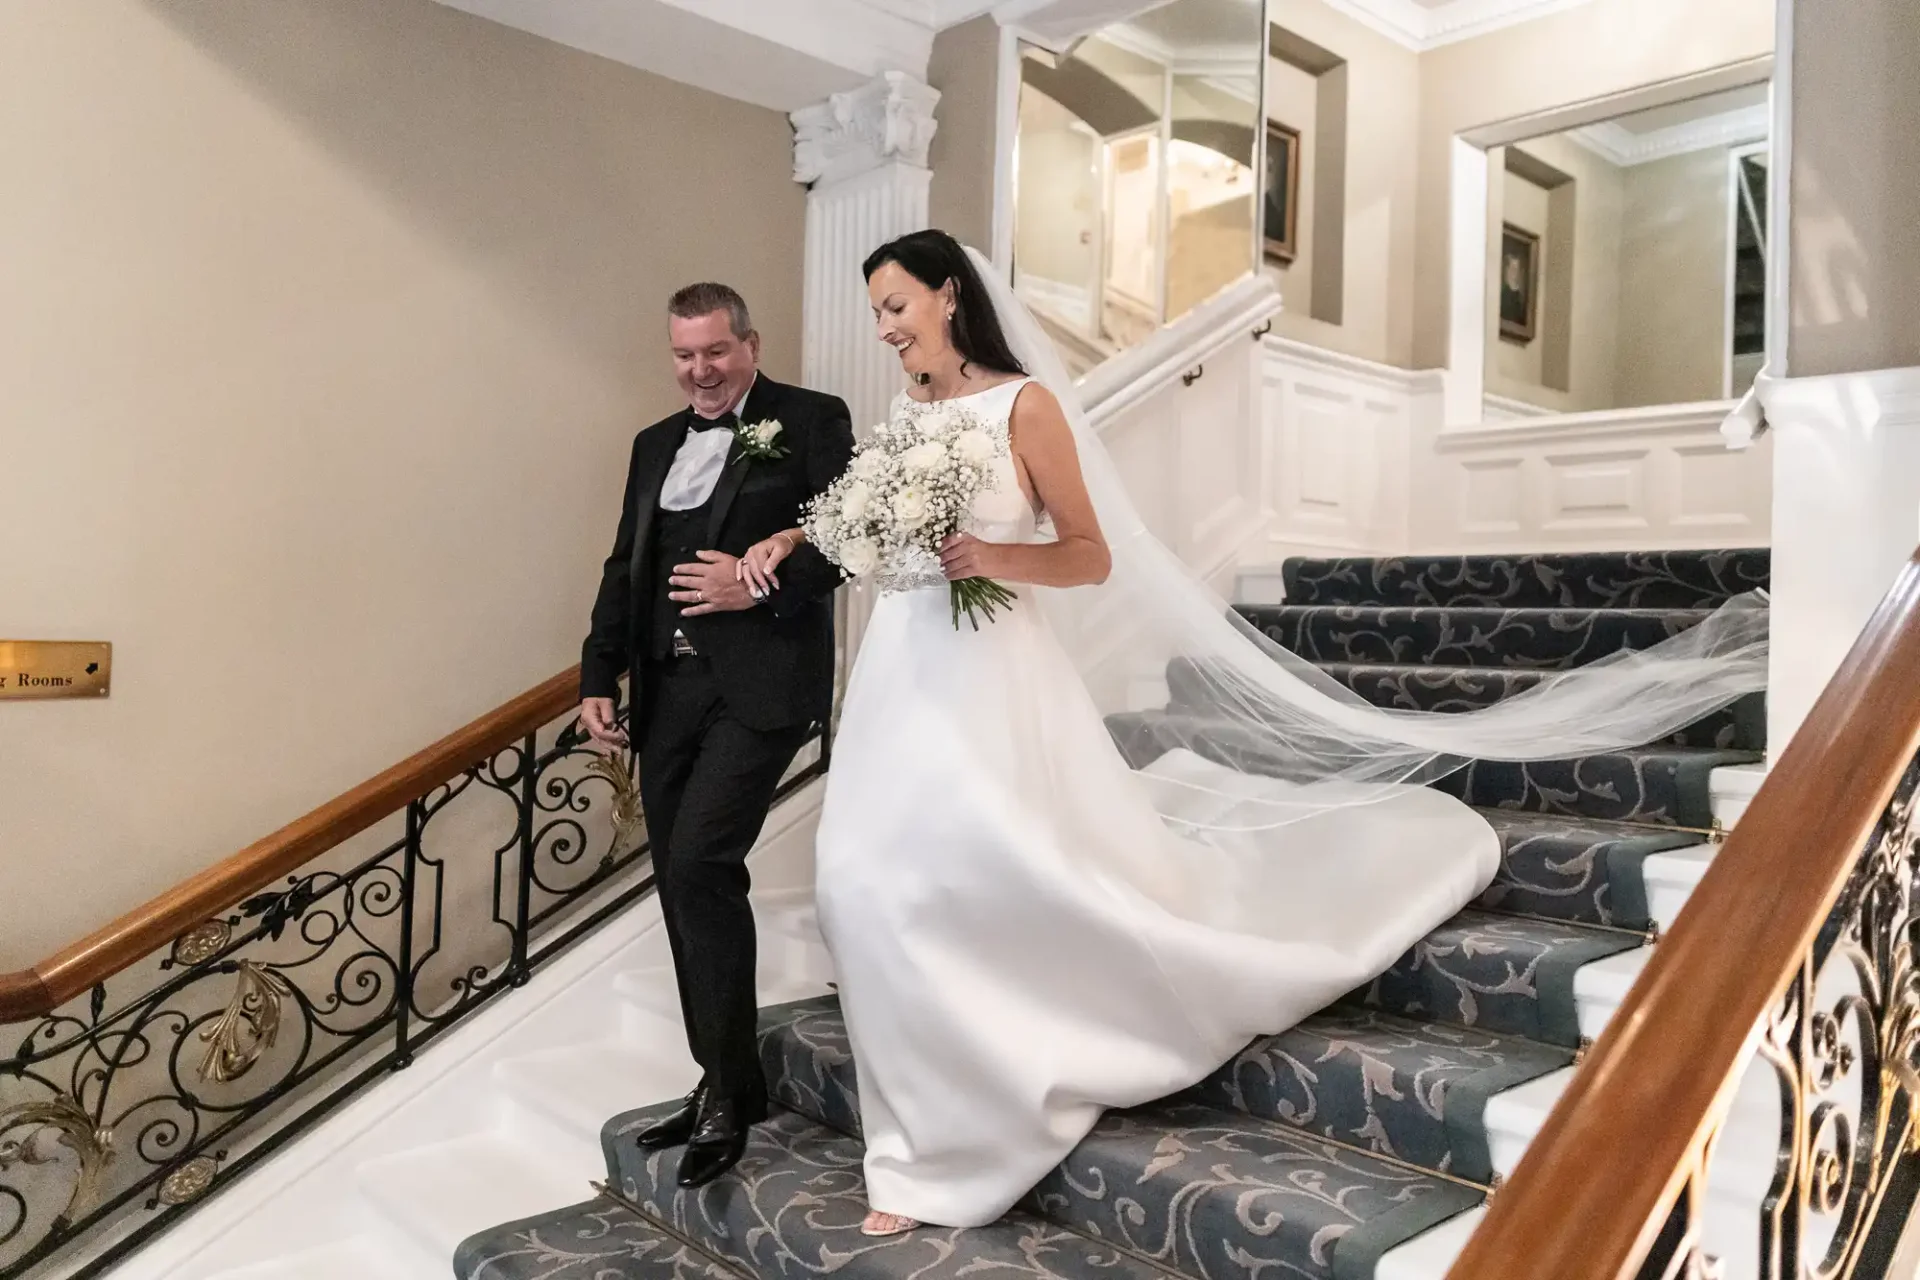 A bride in a white gown and a groom in a black suit descend a staircase, smiling joyfully, with the bride holding a bouquet.